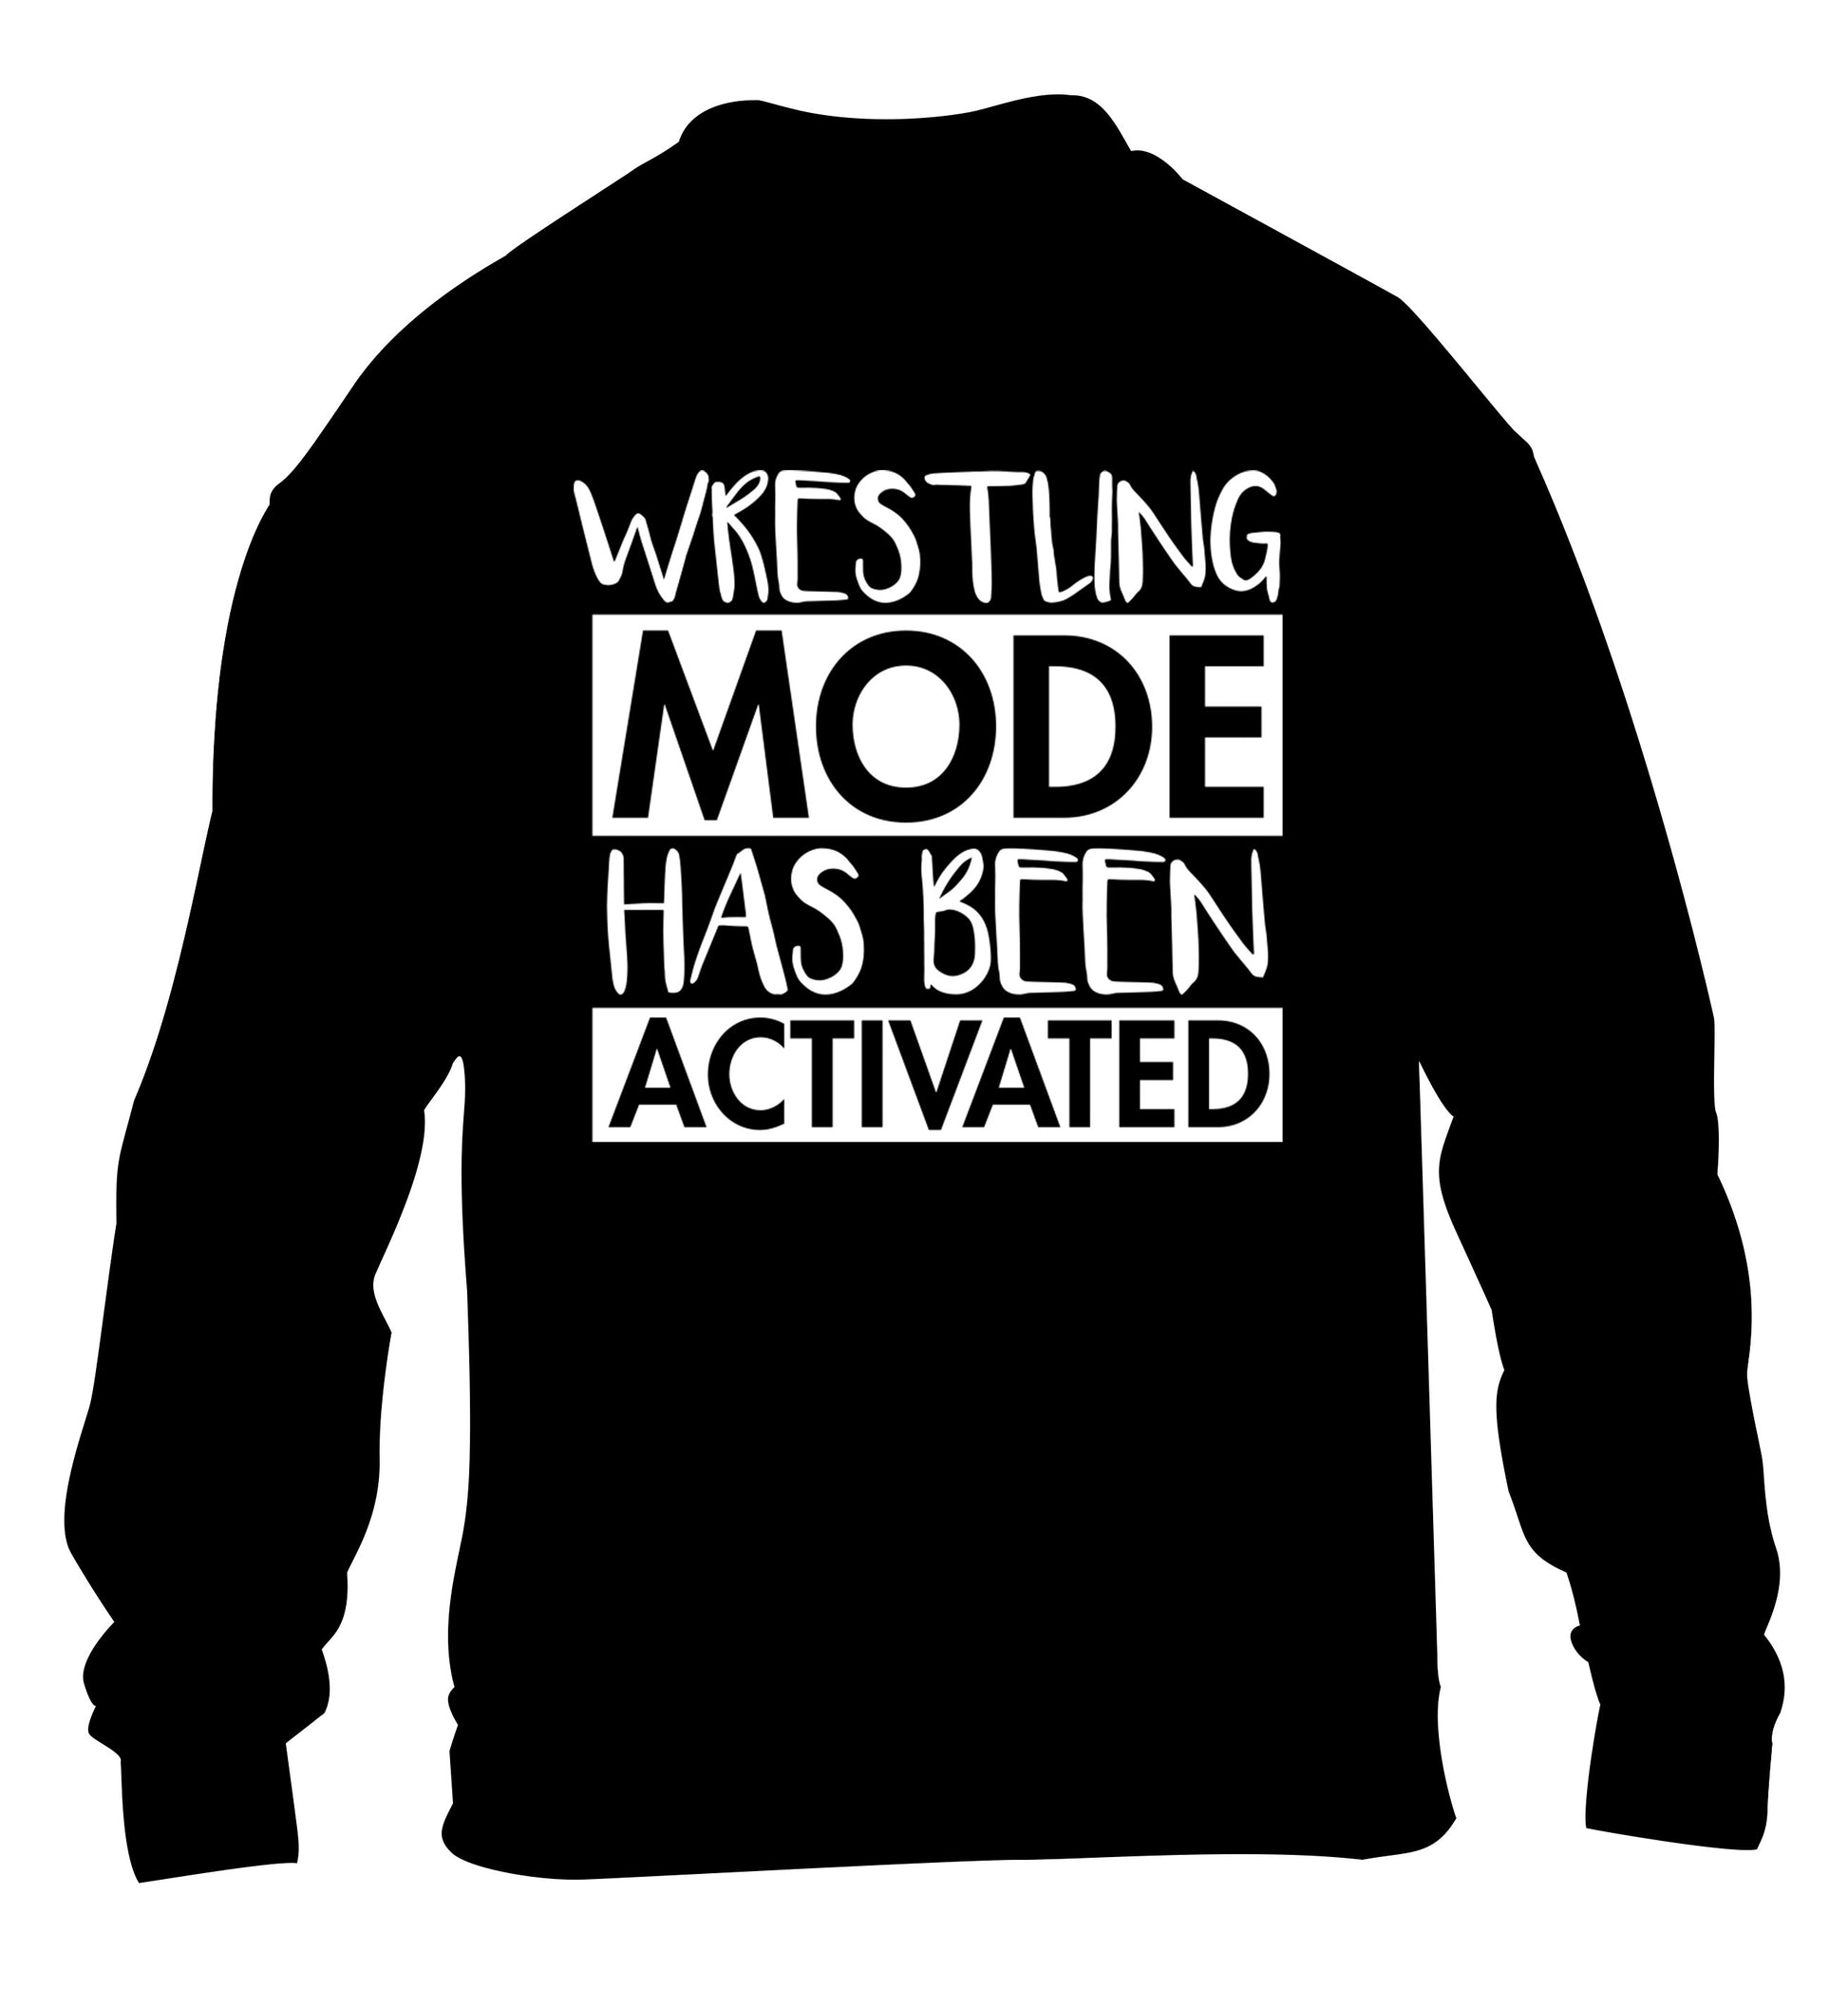 Wresting mode activated children's black sweater 12-14 Years